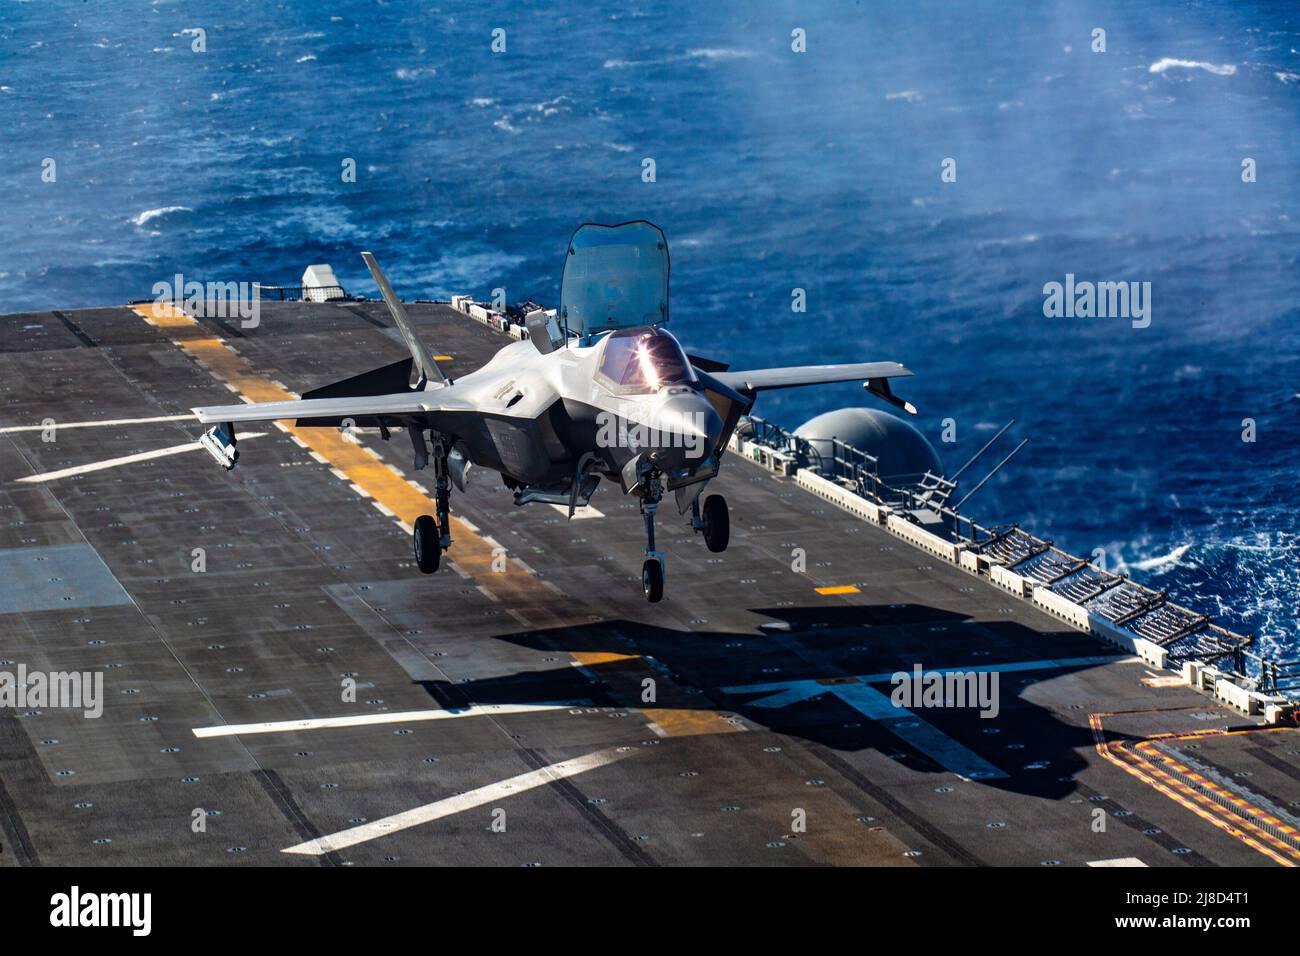 A U.S. Marine Corps F-35B Lightning II fighter aircraft, attached to the Knightriders of Marine Medium Tiltrotor Squadron 164, performs a vertical landing on the flight deck of the Wasp-class amphibious assault ship USS Makin Island, November 19, 2020 operating on the Pacific Ocean. Stock Photo